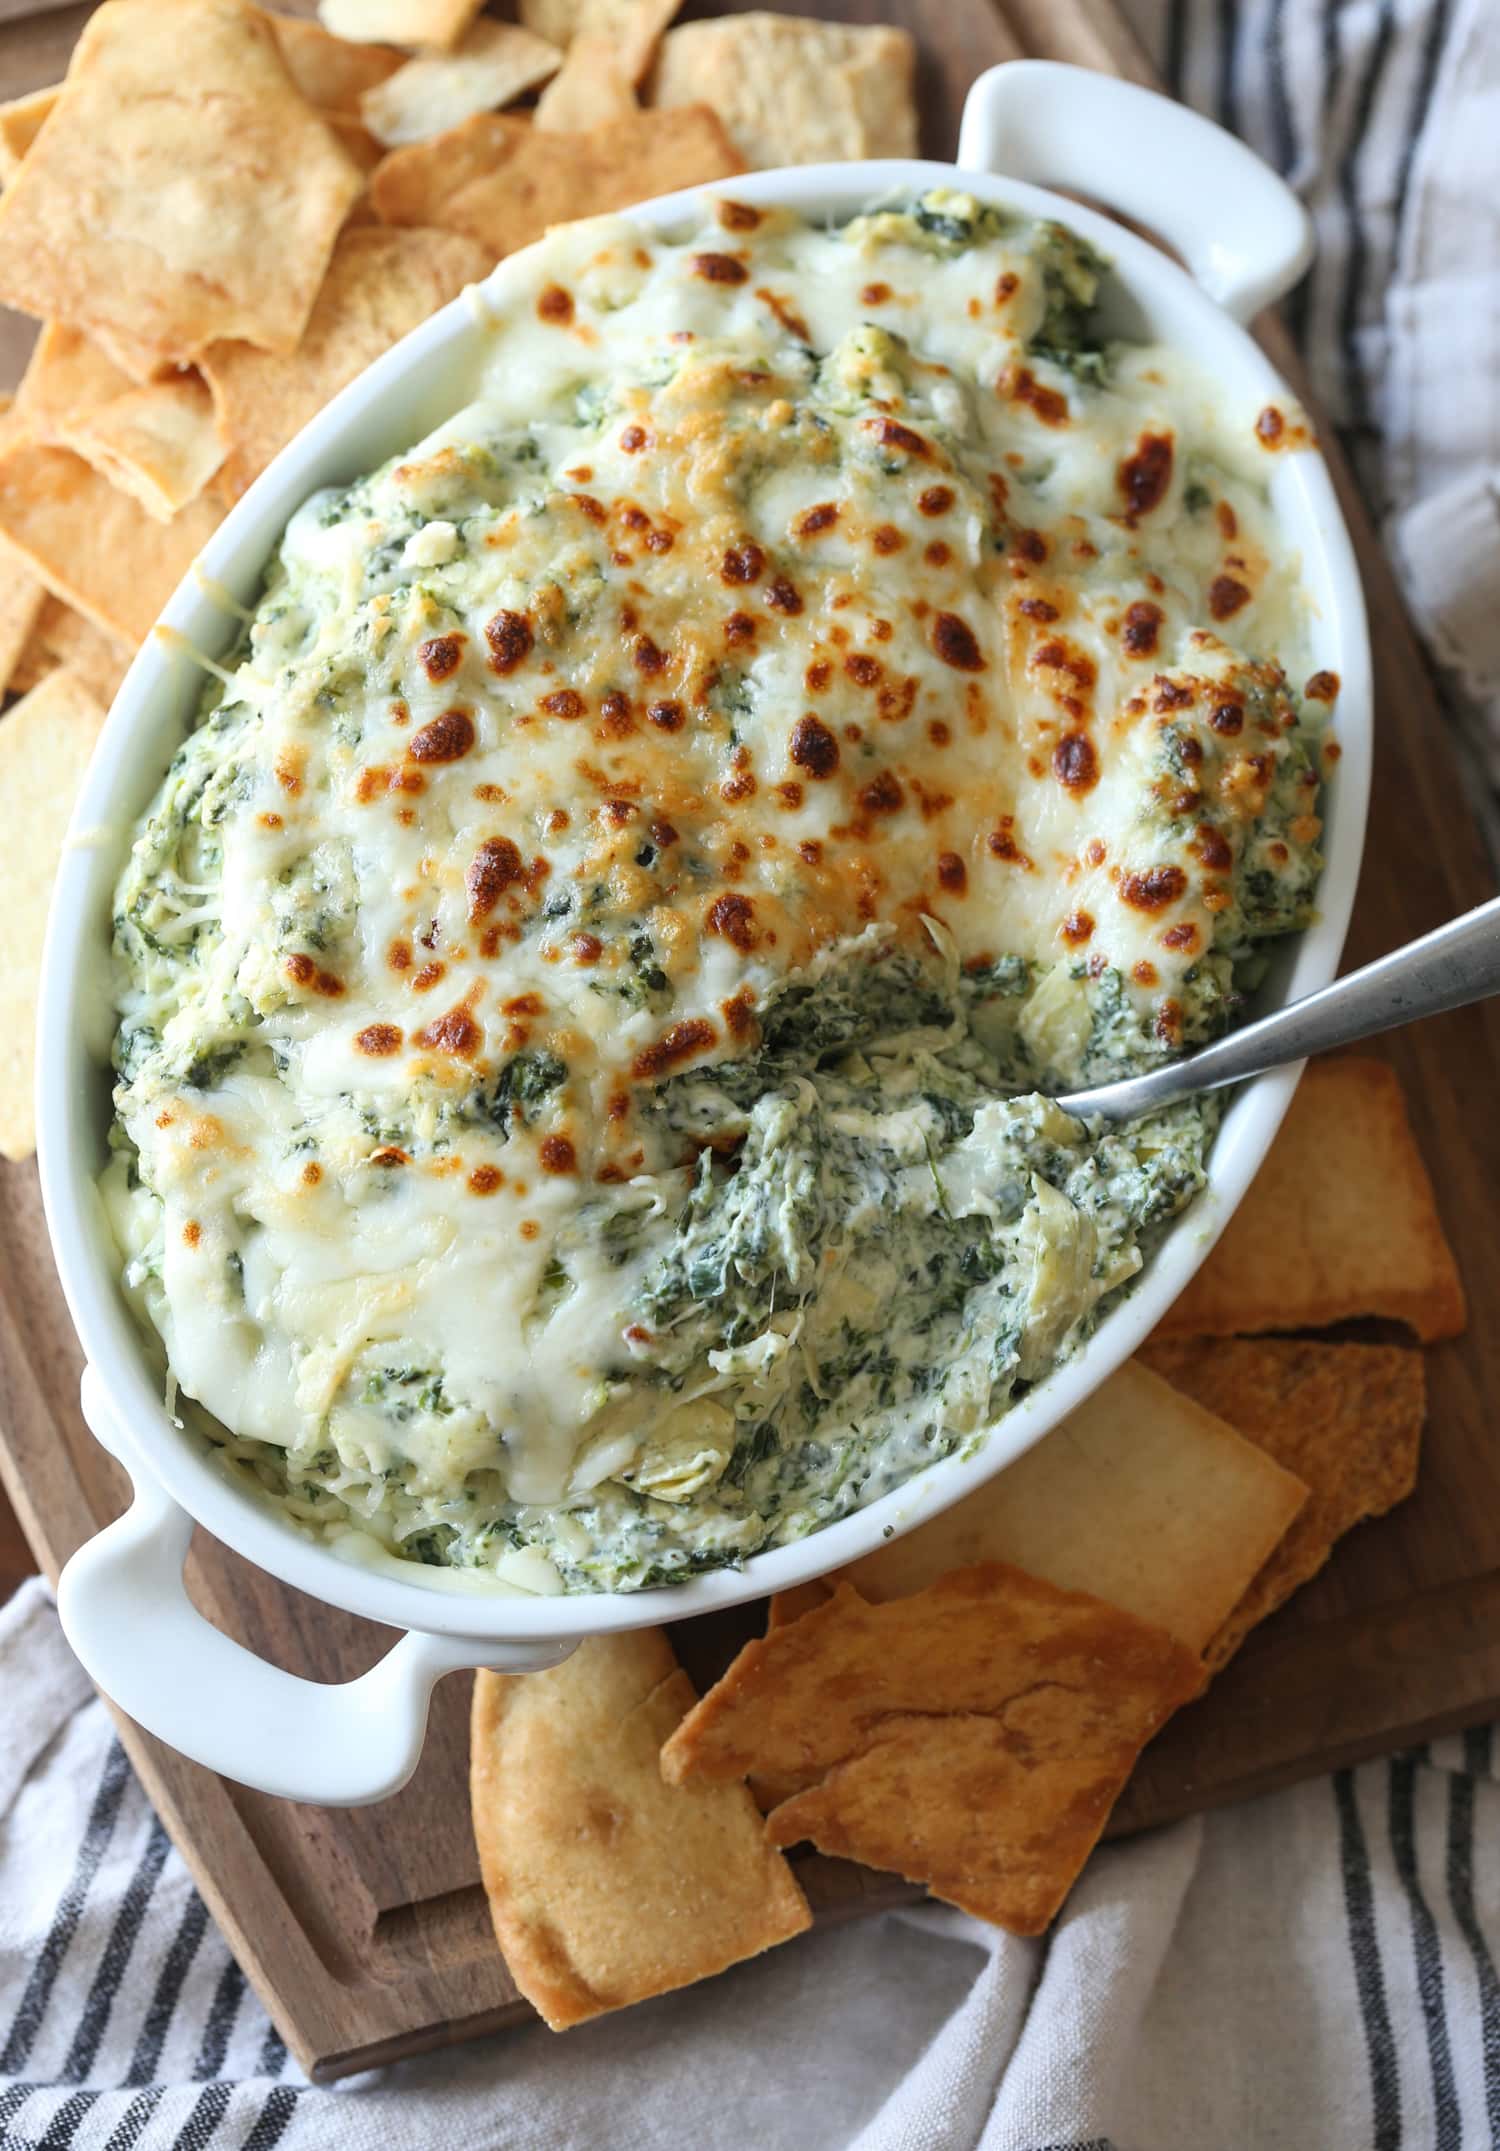 Broiled spinach and artichoke dip served with pita chips.